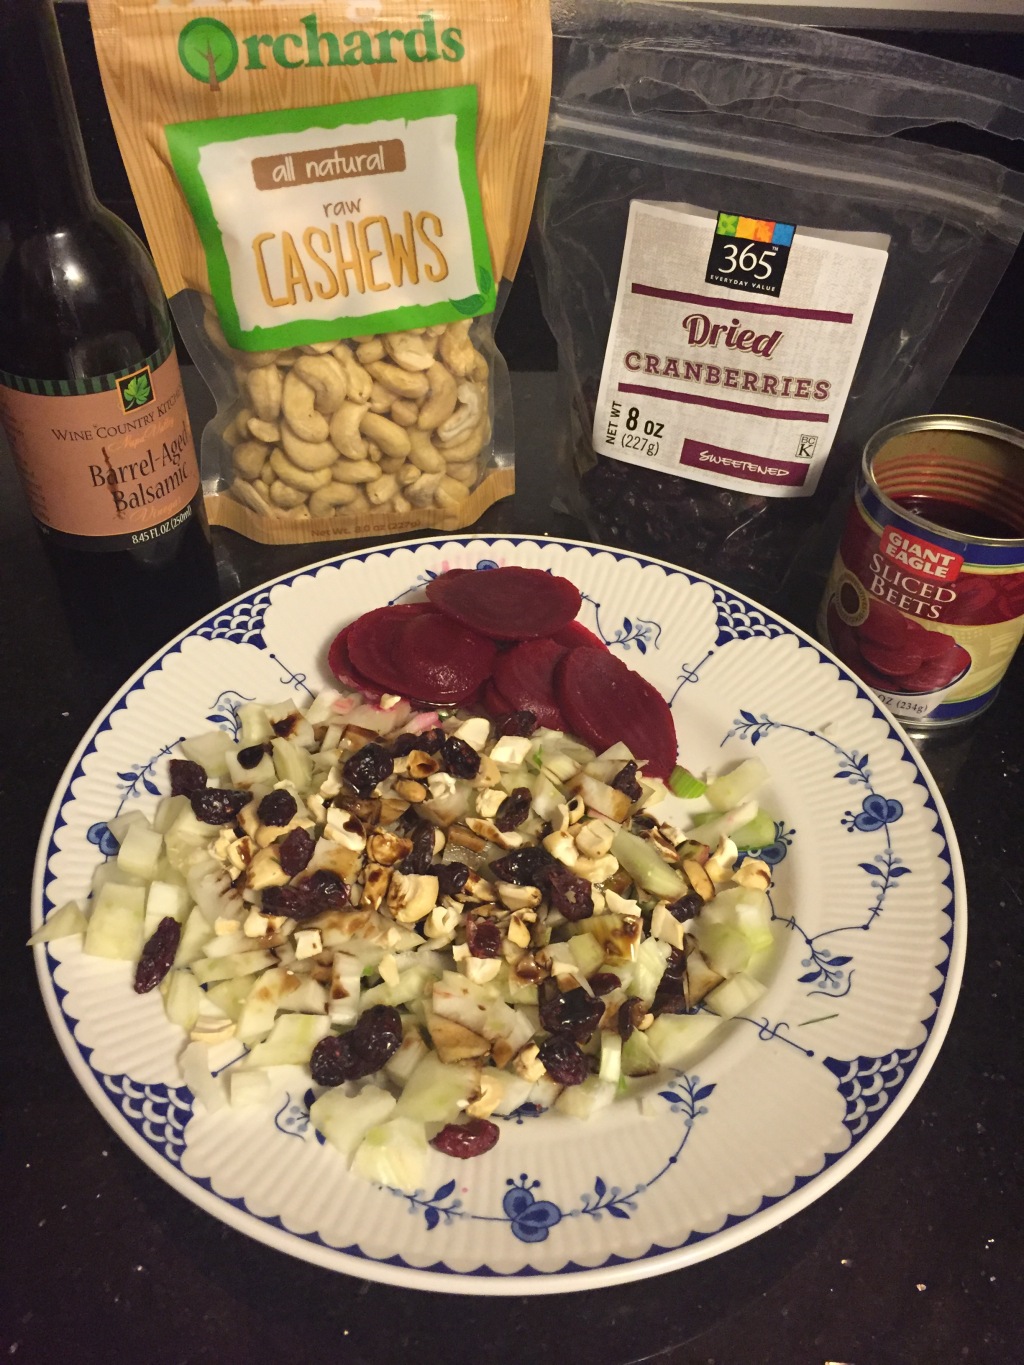 Image of fennel salad and ingredients